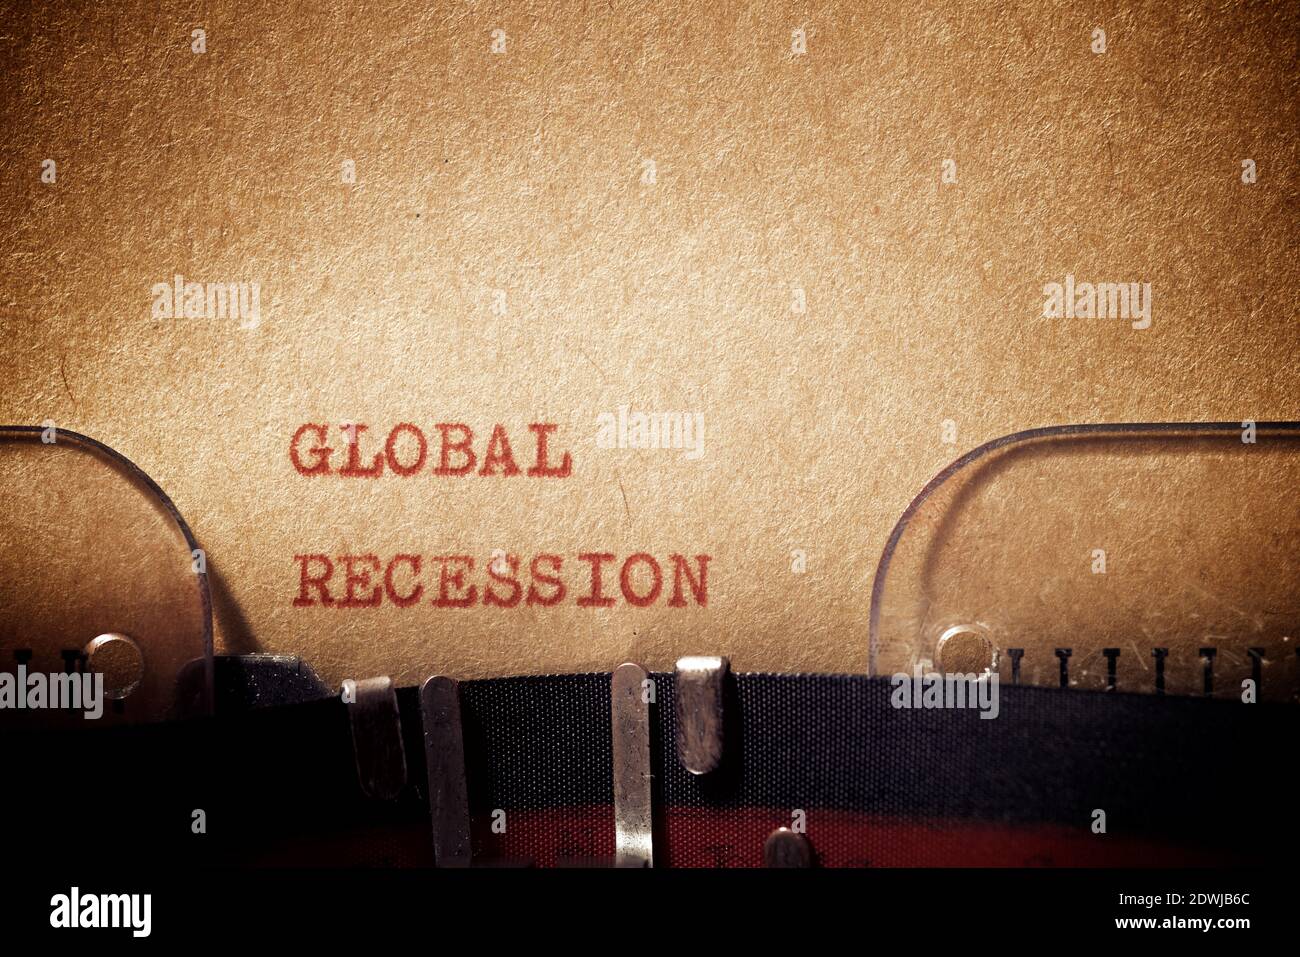 Global recession phrase written with a typewriter. Stock Photo